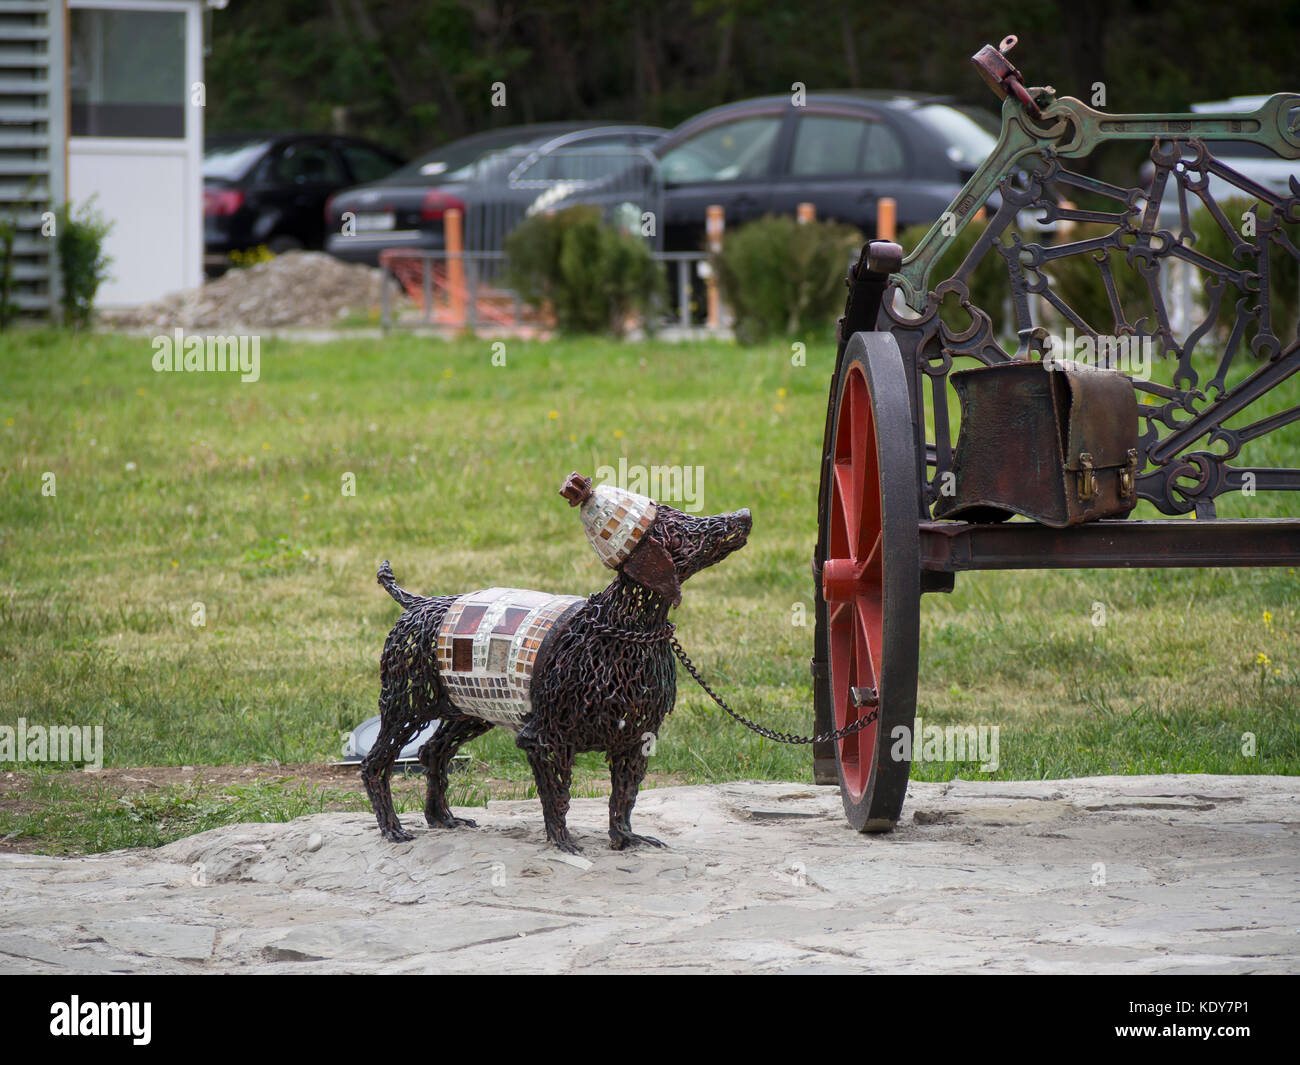 Recycling old metal tools into artwork, sculpture of poodle dog tied to a bench waiting for his master in the Rike park, Tbilisi Georgia Stock Photo